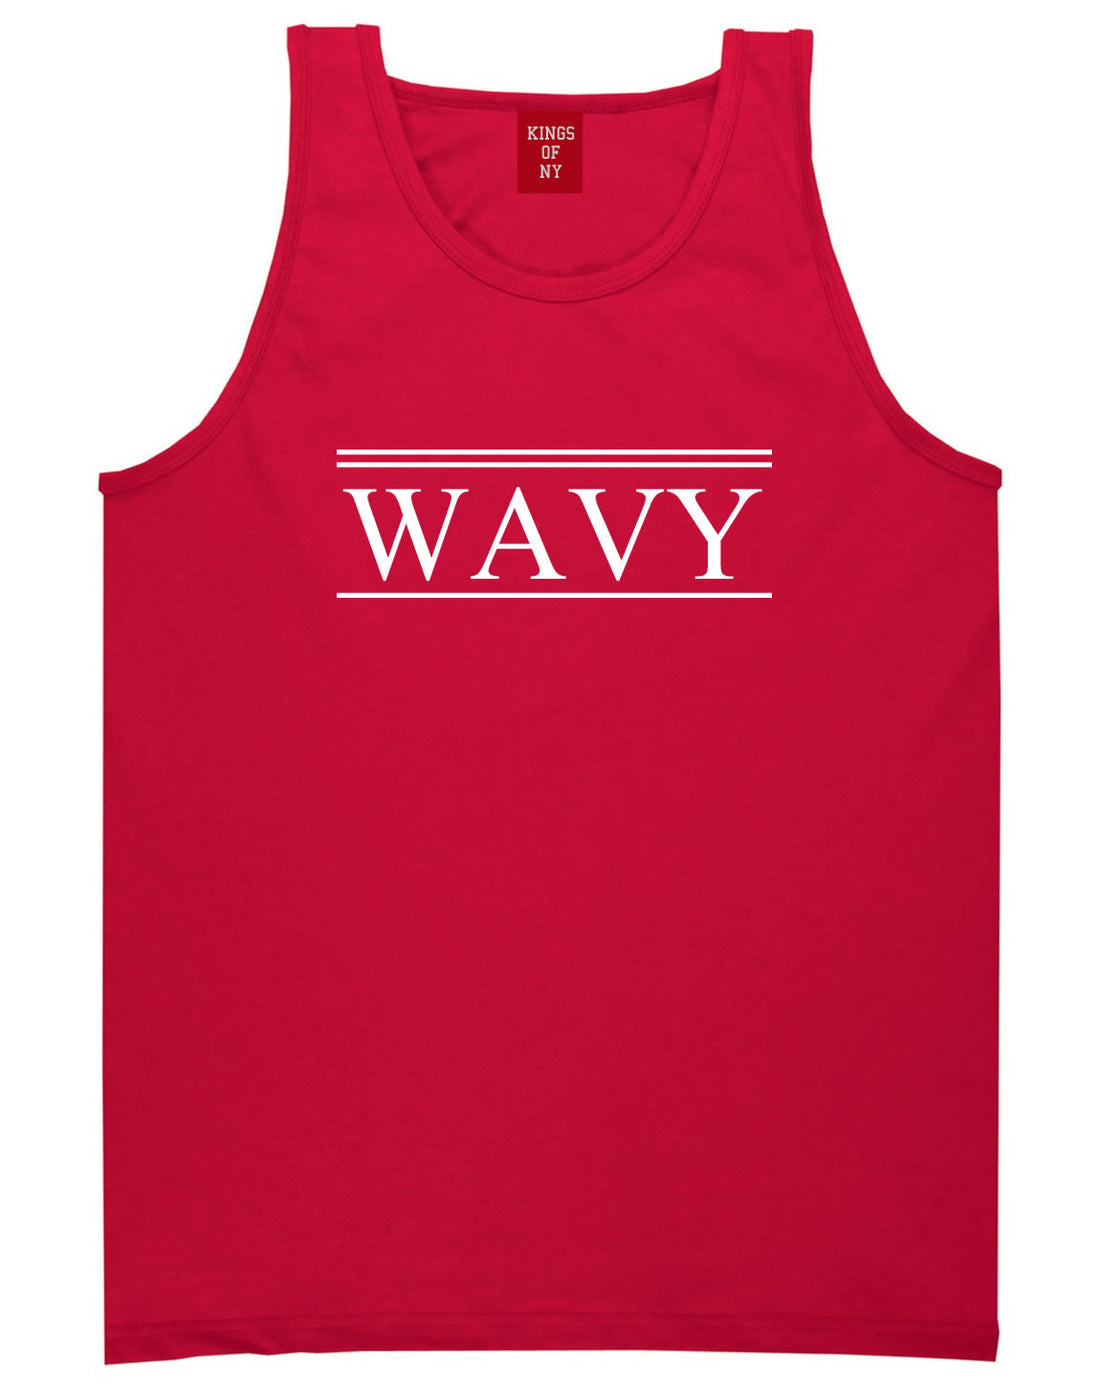 Wavy Harlem Tank Top in Red By Kings Of NY